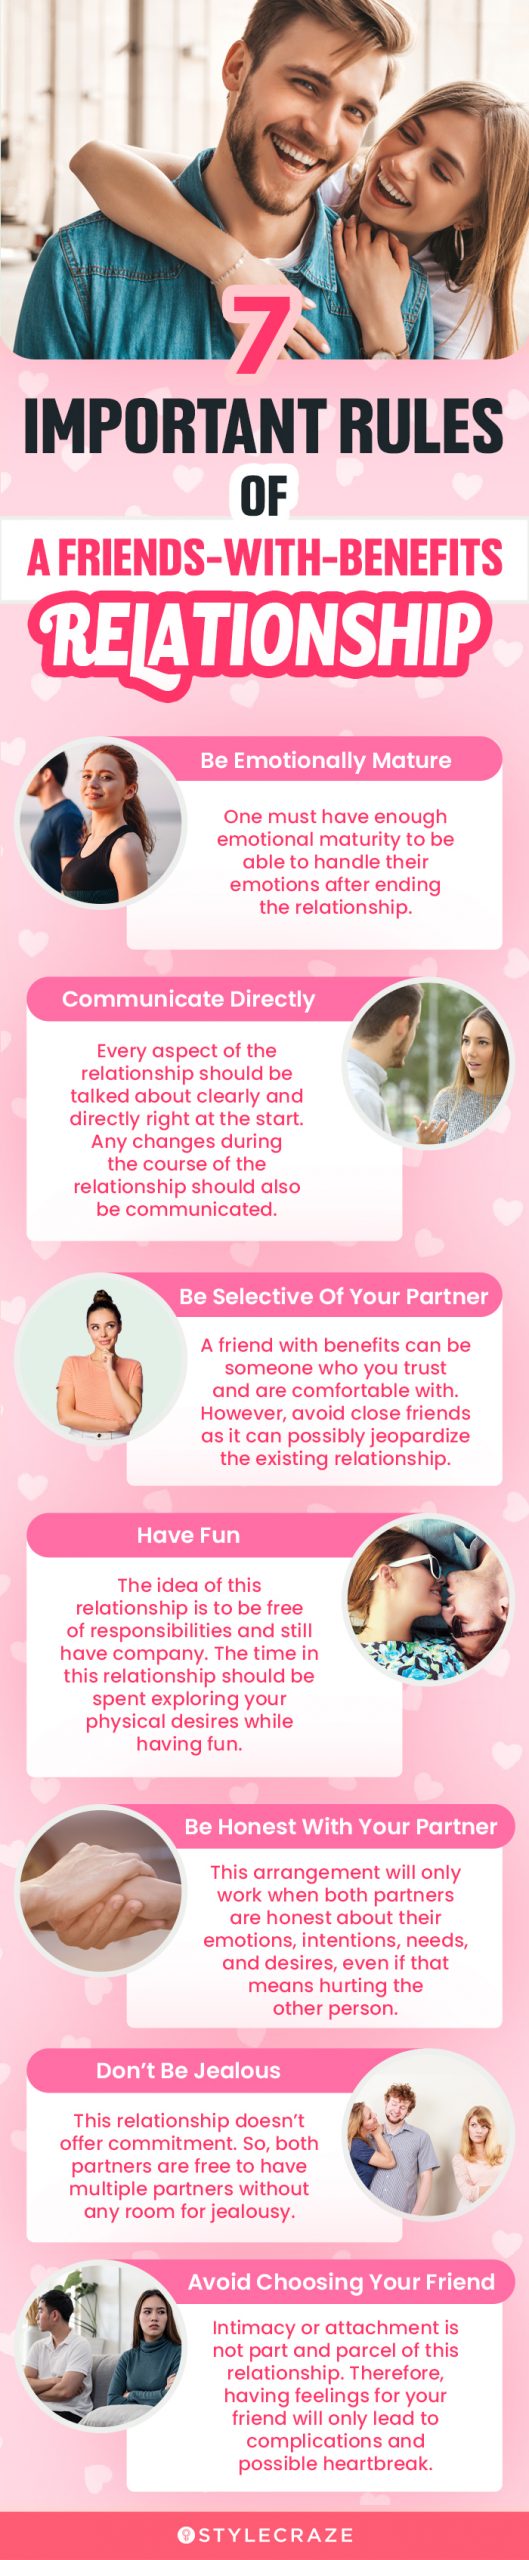 7 important rules of a friends with benefits relationship (infographic)